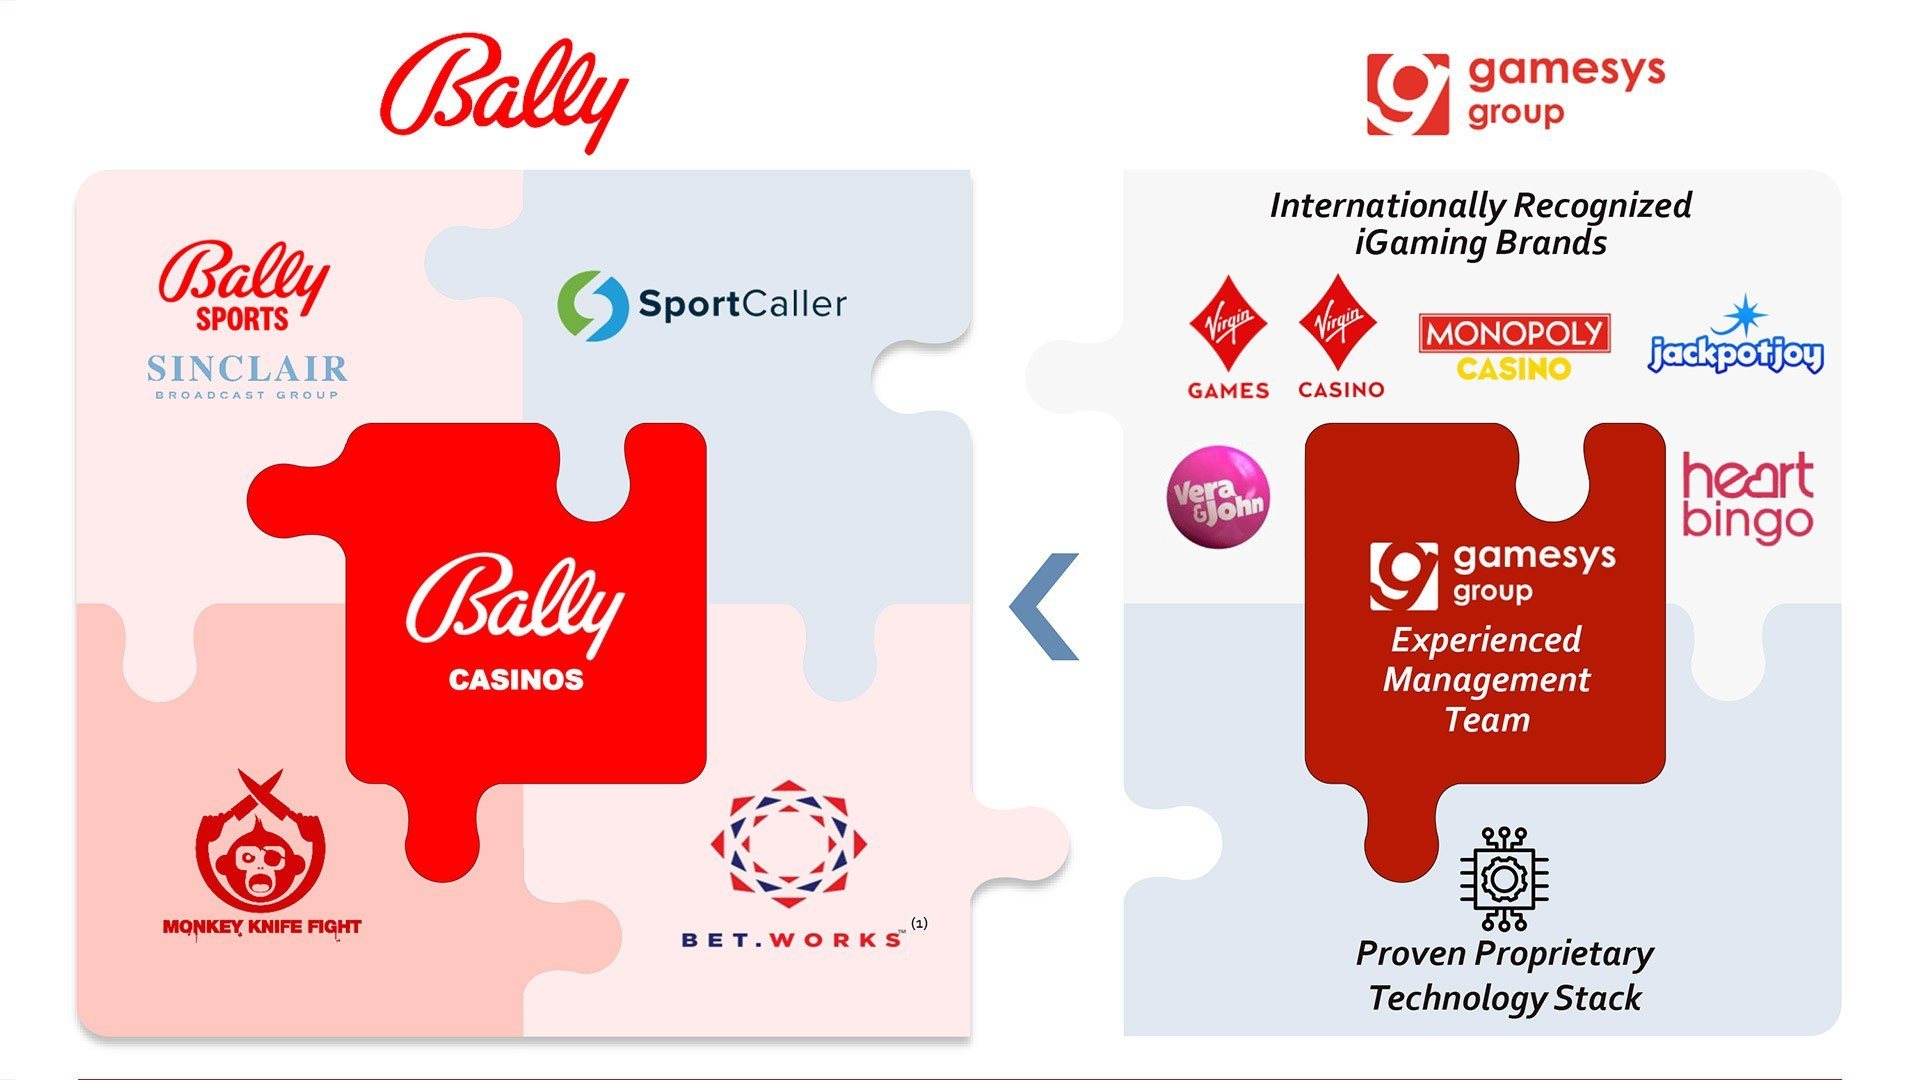 Gamesys Group & Bally's Corporation merger